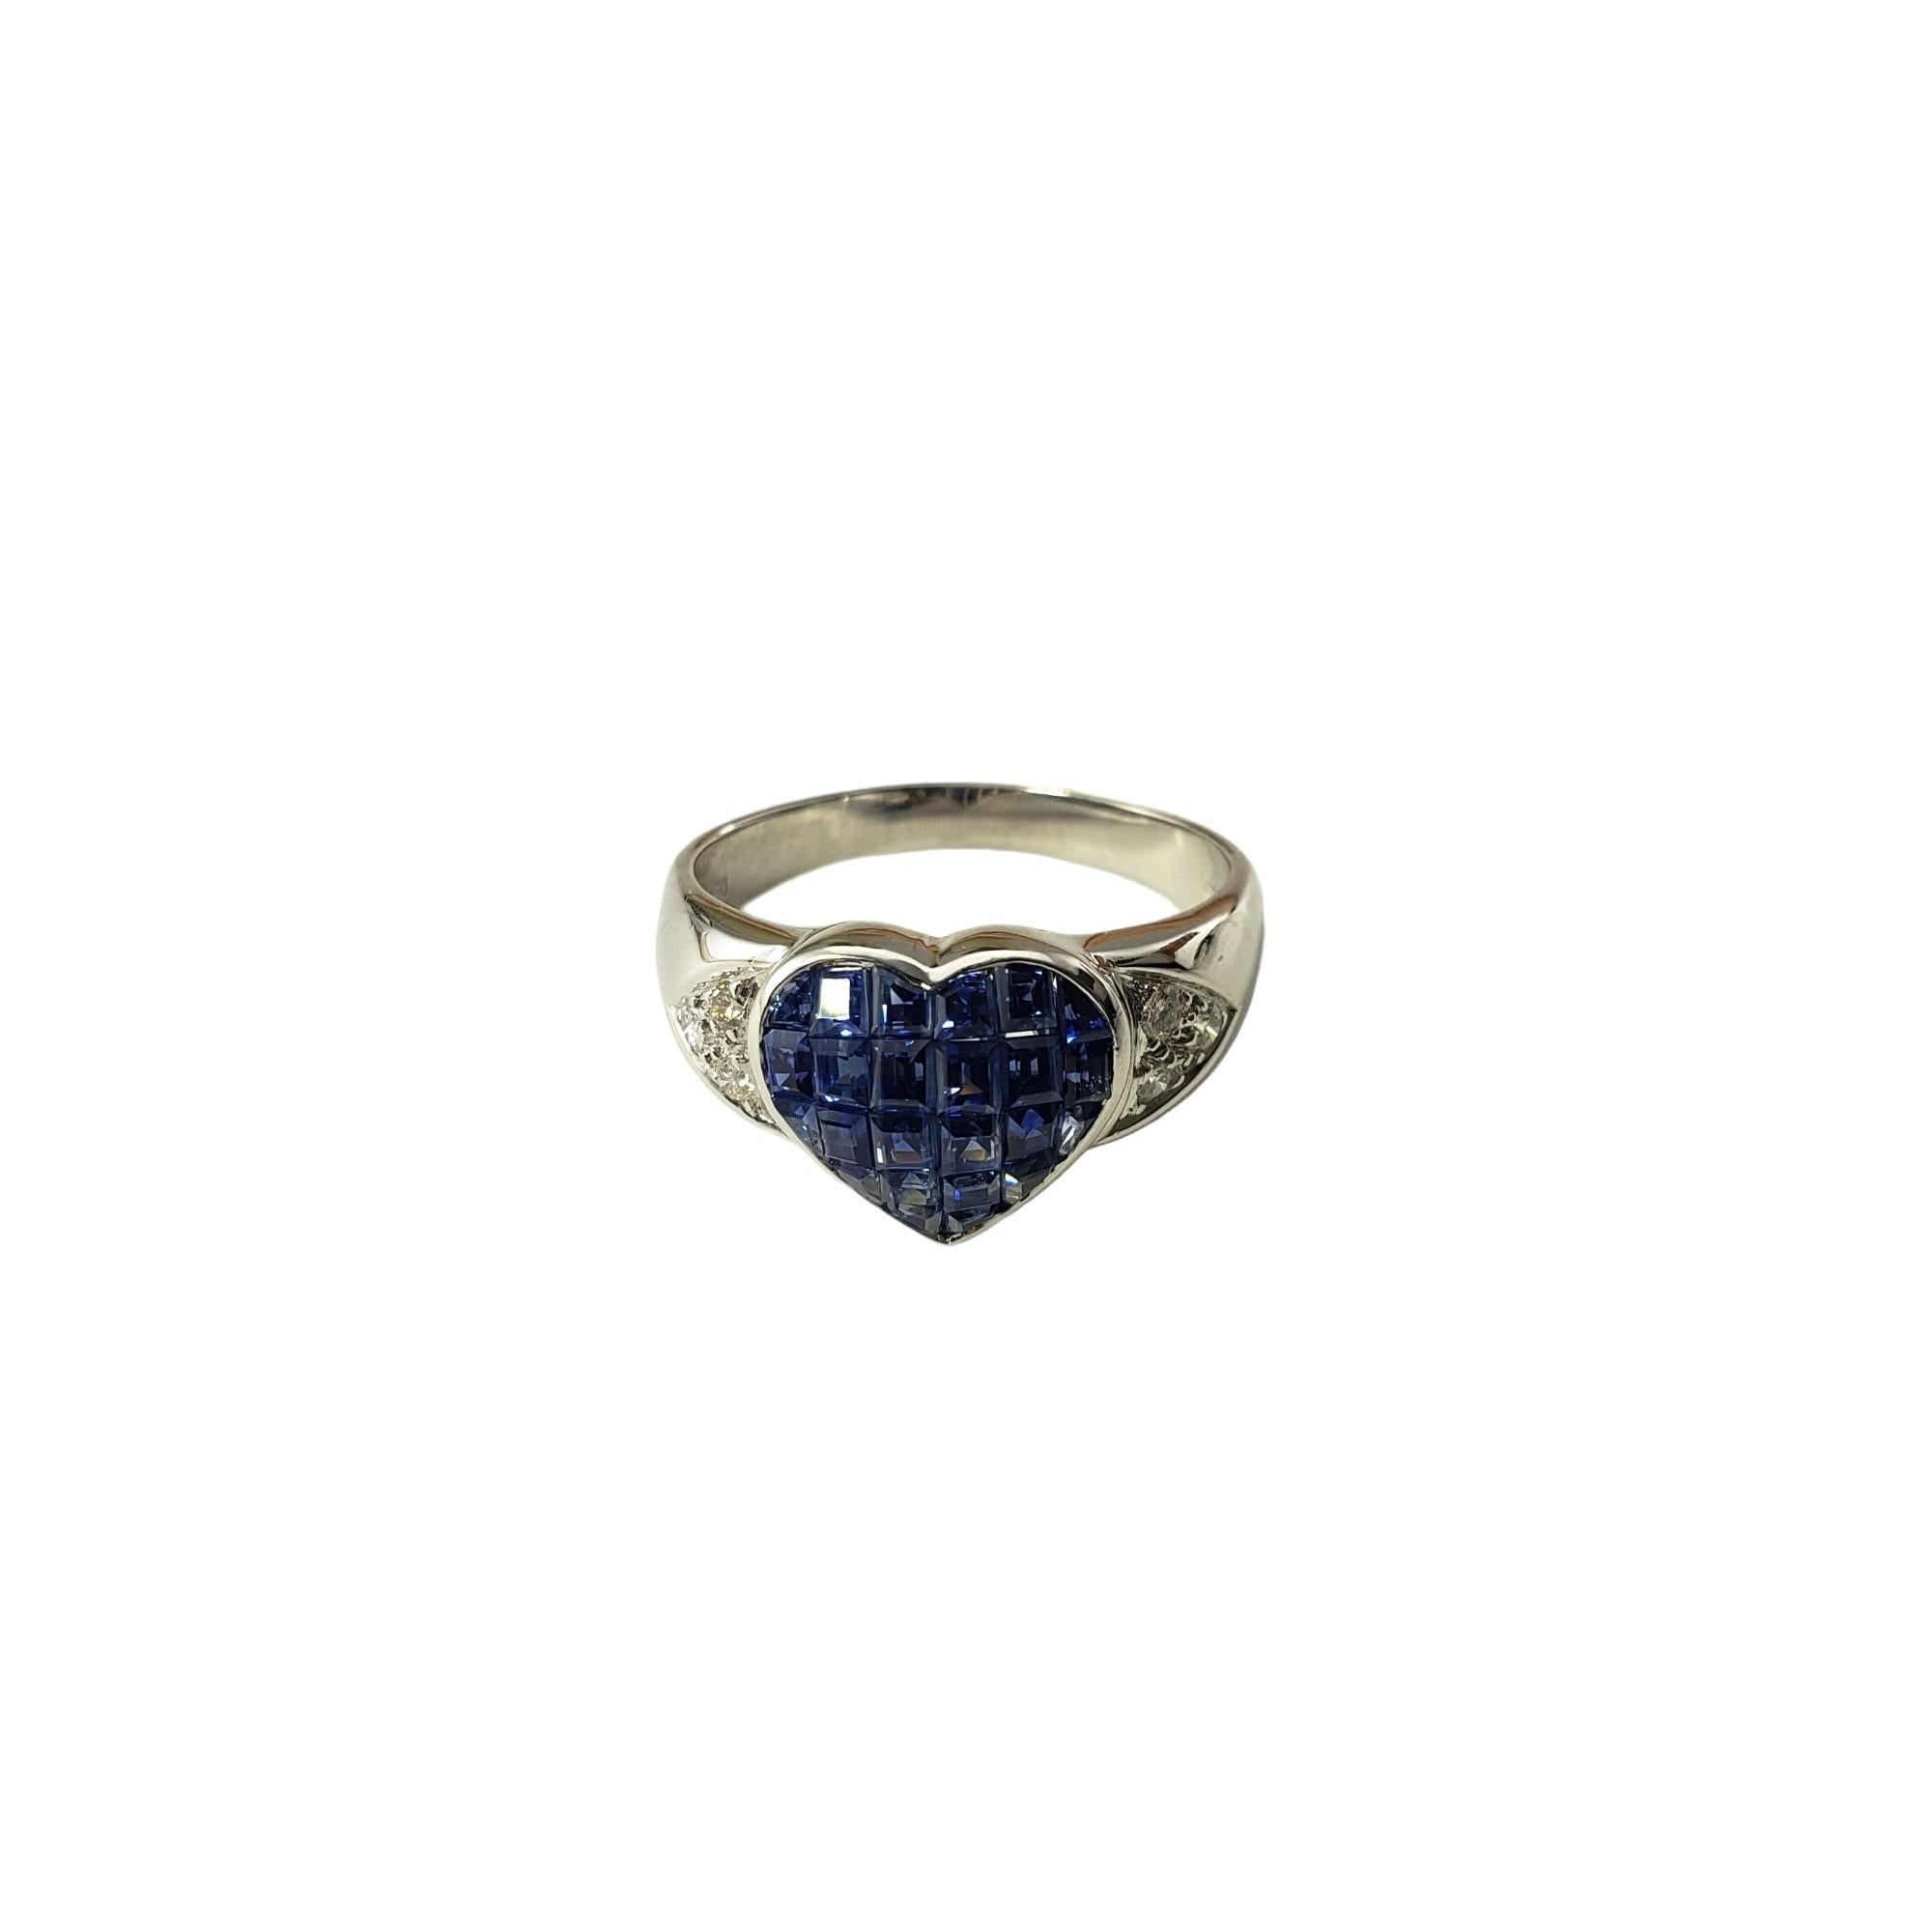 Vintage 18 Karat White Gold Sapphire and Diamond Heart Ring Size 9 JAGi Certified-

This elegant heart ring features 24 princess cut sapphires and six round brilliant cut diamonds set in classic 18K white gold.  Width:  11.4 mm.  Shank: 2.8